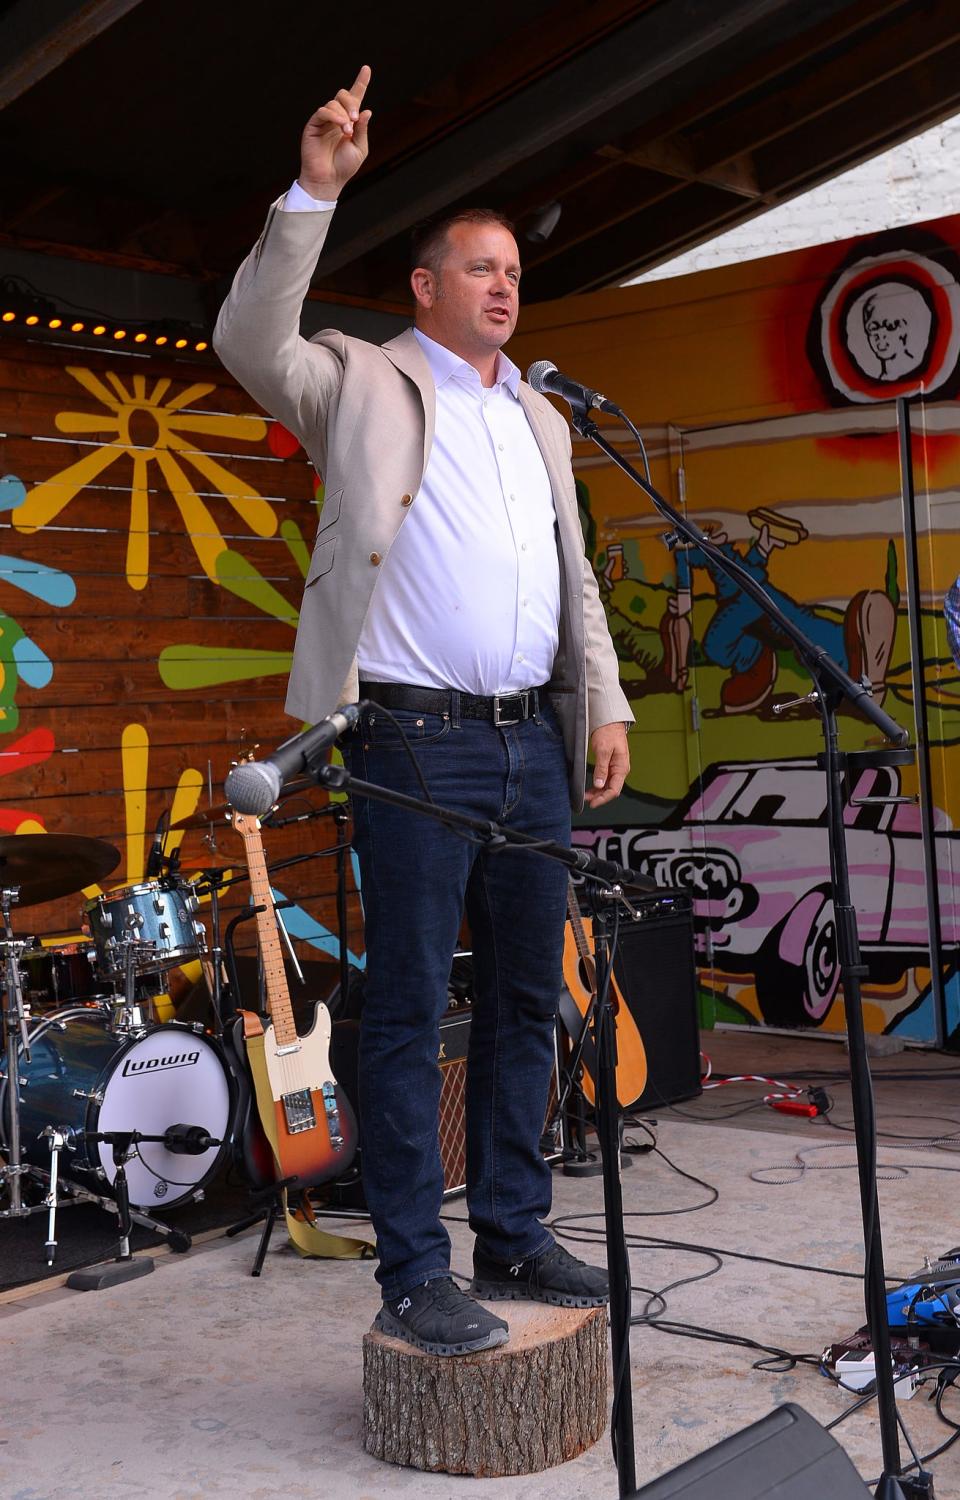 Candidates running for the upcoming state and local primary election speak during the Stump the Yard event held at FR8yard in downtown Spartanburg, Monday evening, June 6, 2022. Travis Bedson, candidate for State Superintendent of Education, speaks during the event.